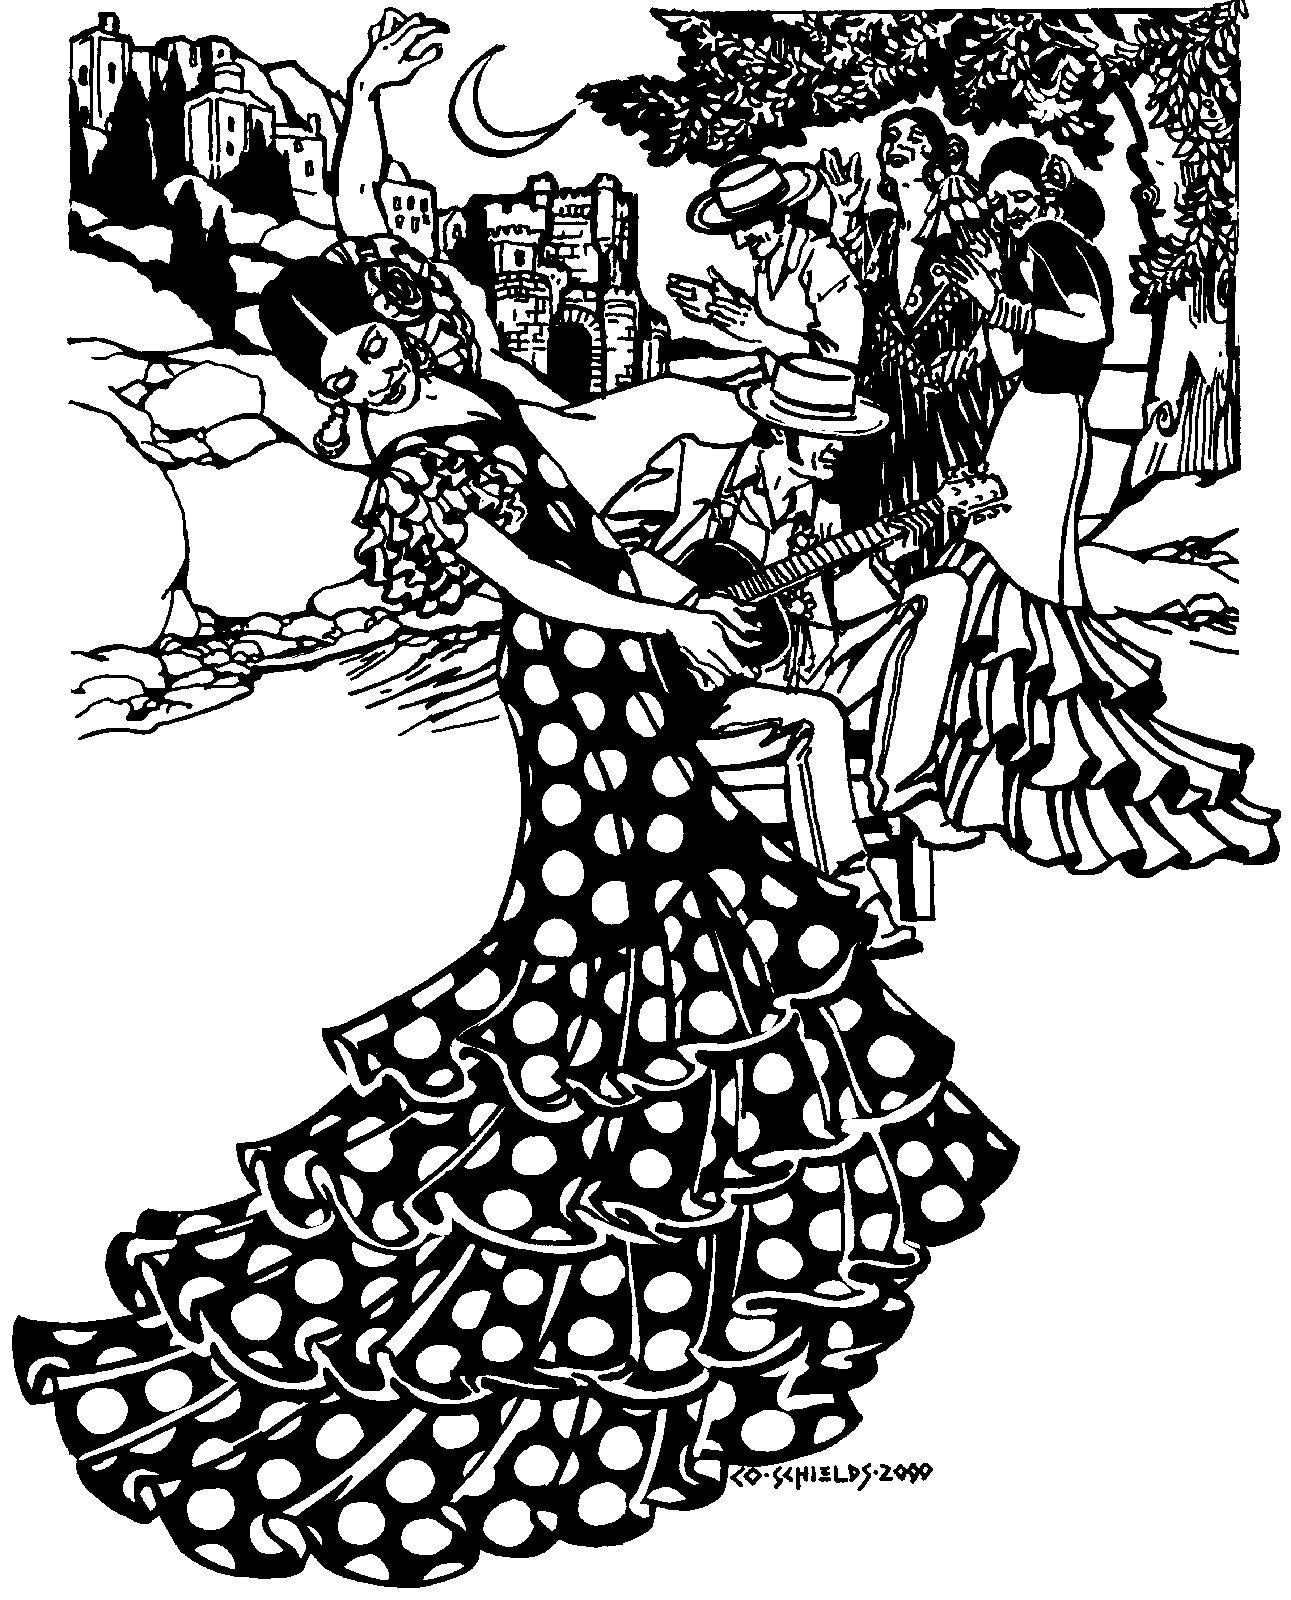 Black and white pen and ink drawing by artist Gretchen Schields.  Woman dancing in Flamenco dress with musicians and several other dancers in the background.  There is a moon light sky and buildings further in the distance.